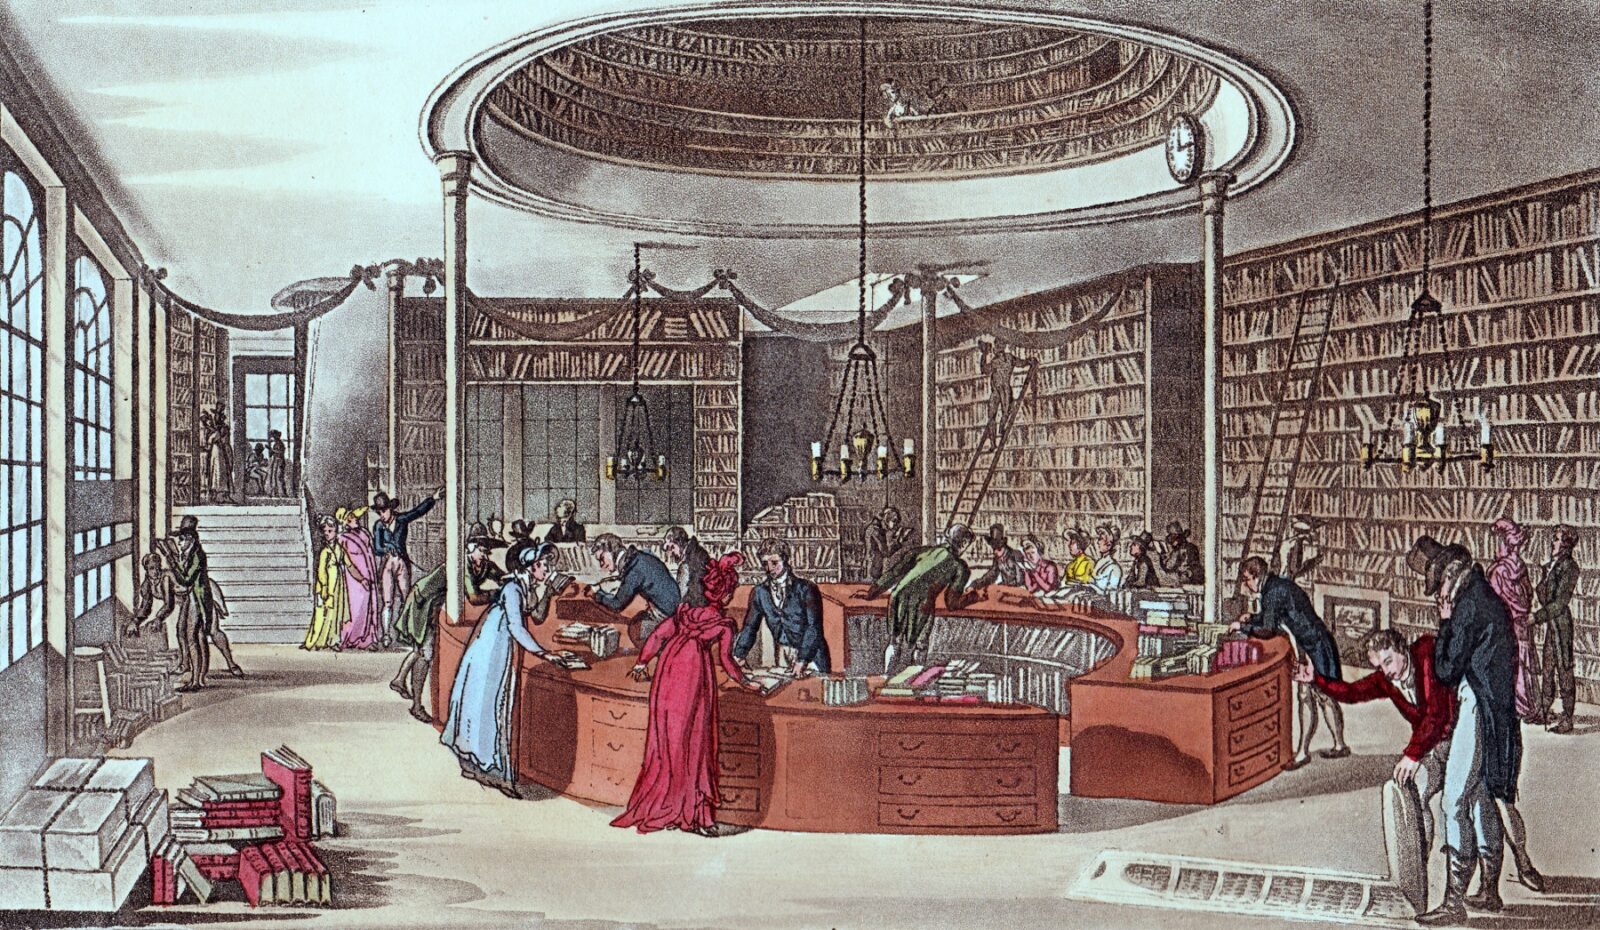 Bookshop – from Ackerman’s. First floor interior of Temple of the Muses (Lackington Allen) as it looked in 1809